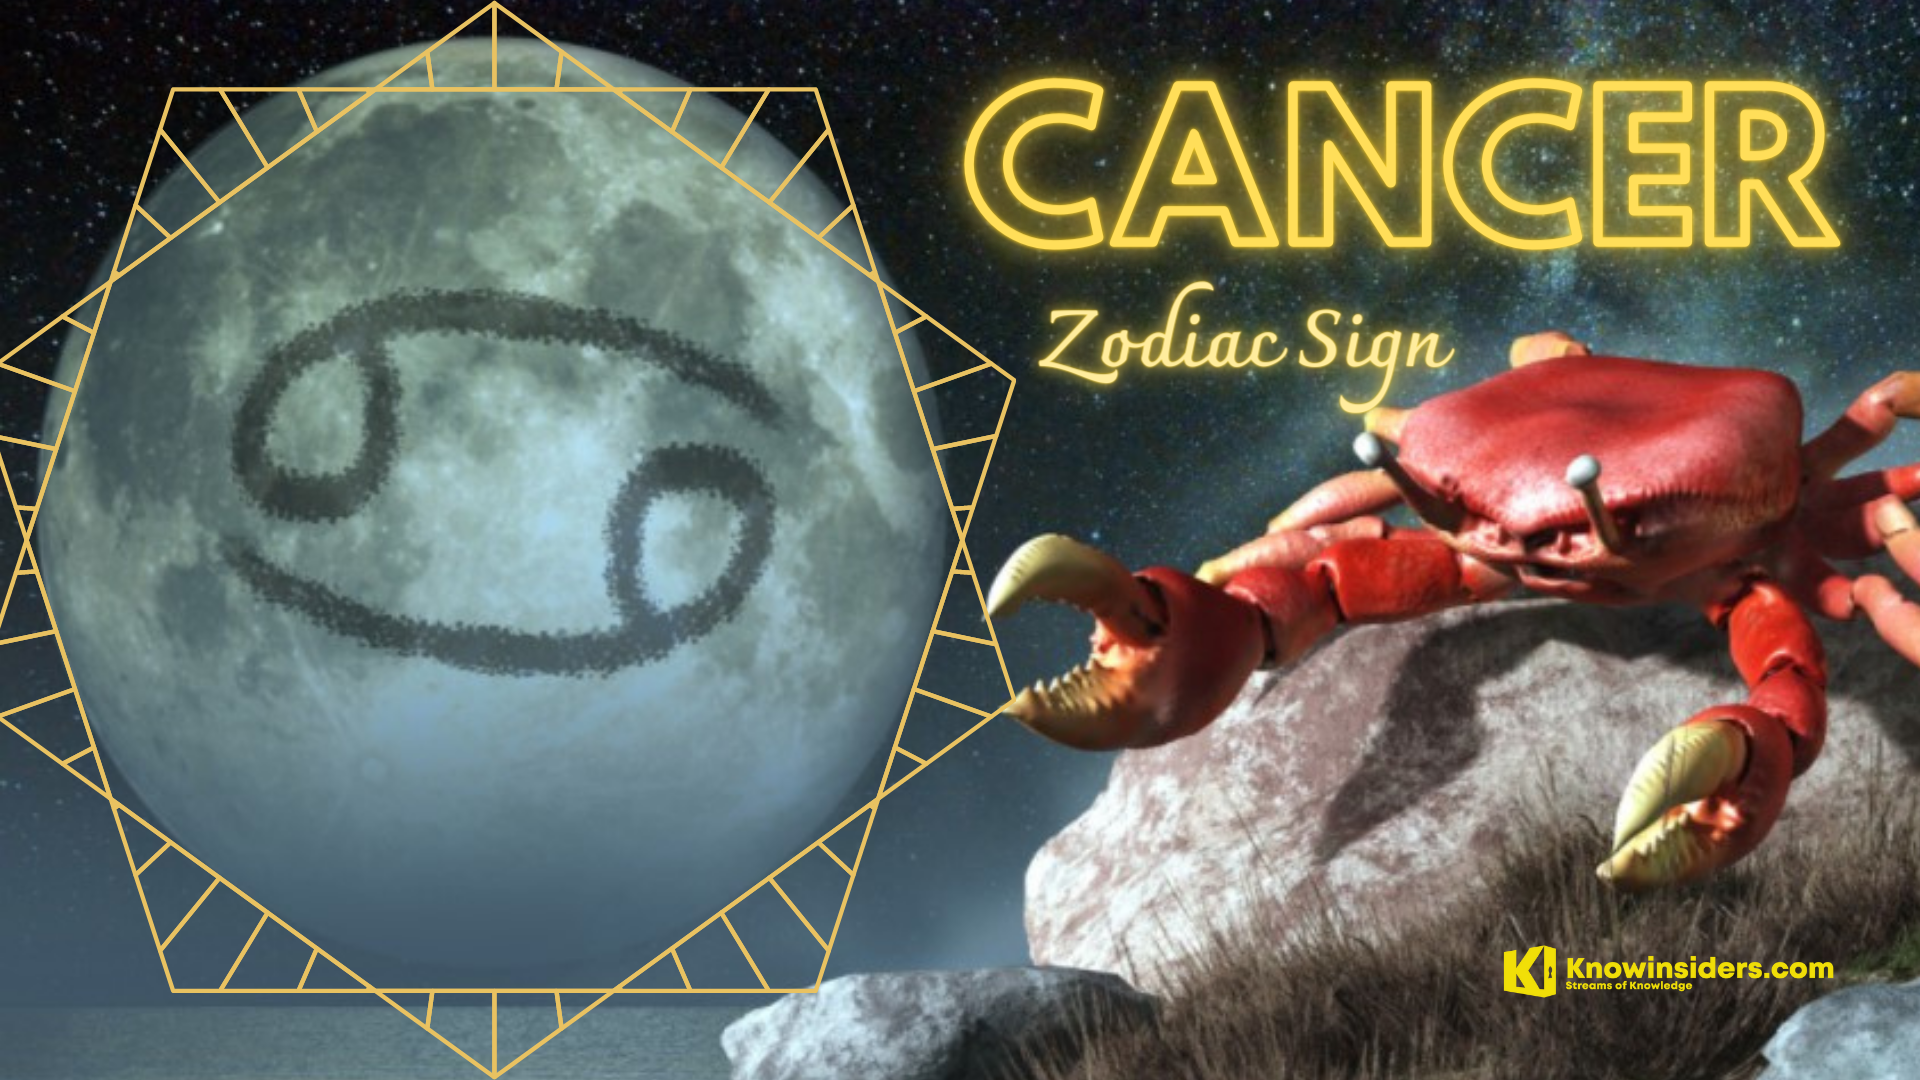 Top 5 Most Dramatic Zodiac Signs According To Astrology